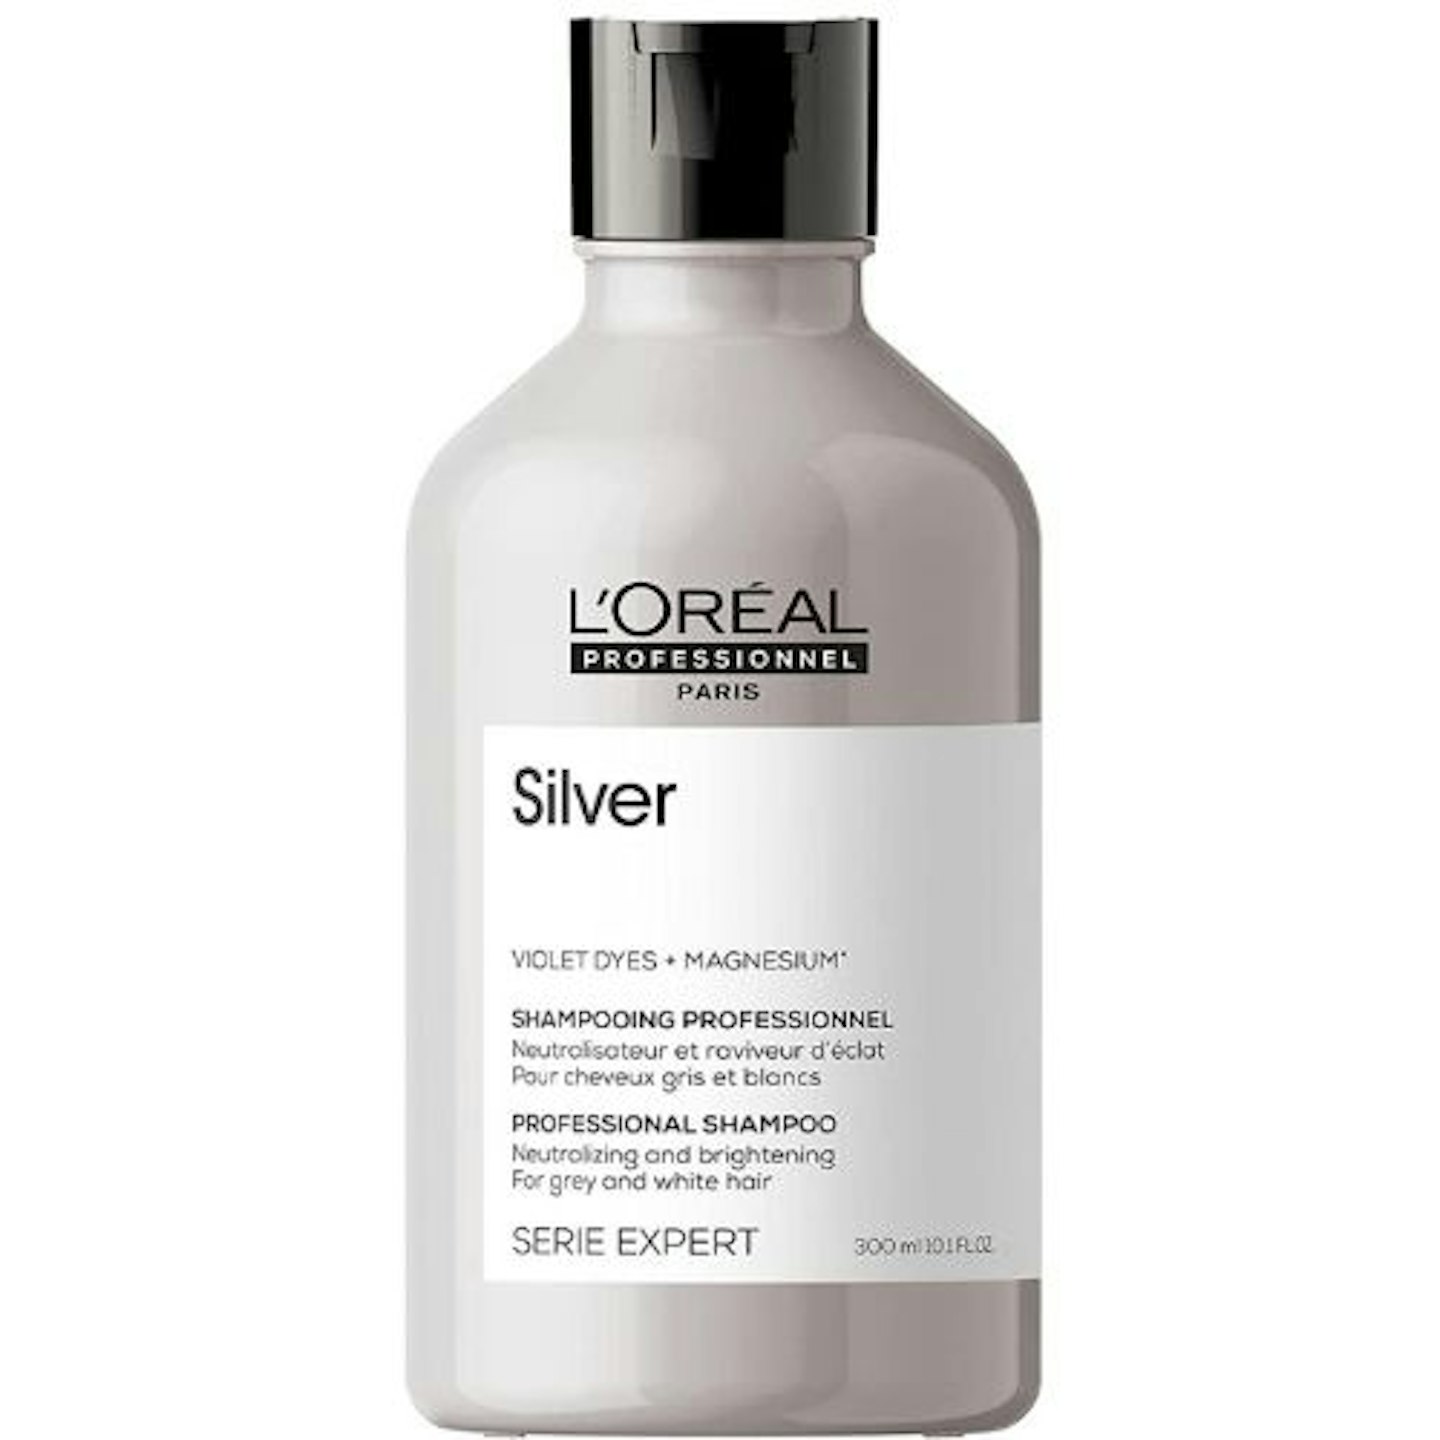 L’Oréal Professionnel Shampoo For Grey, White or Light Blonde Hair